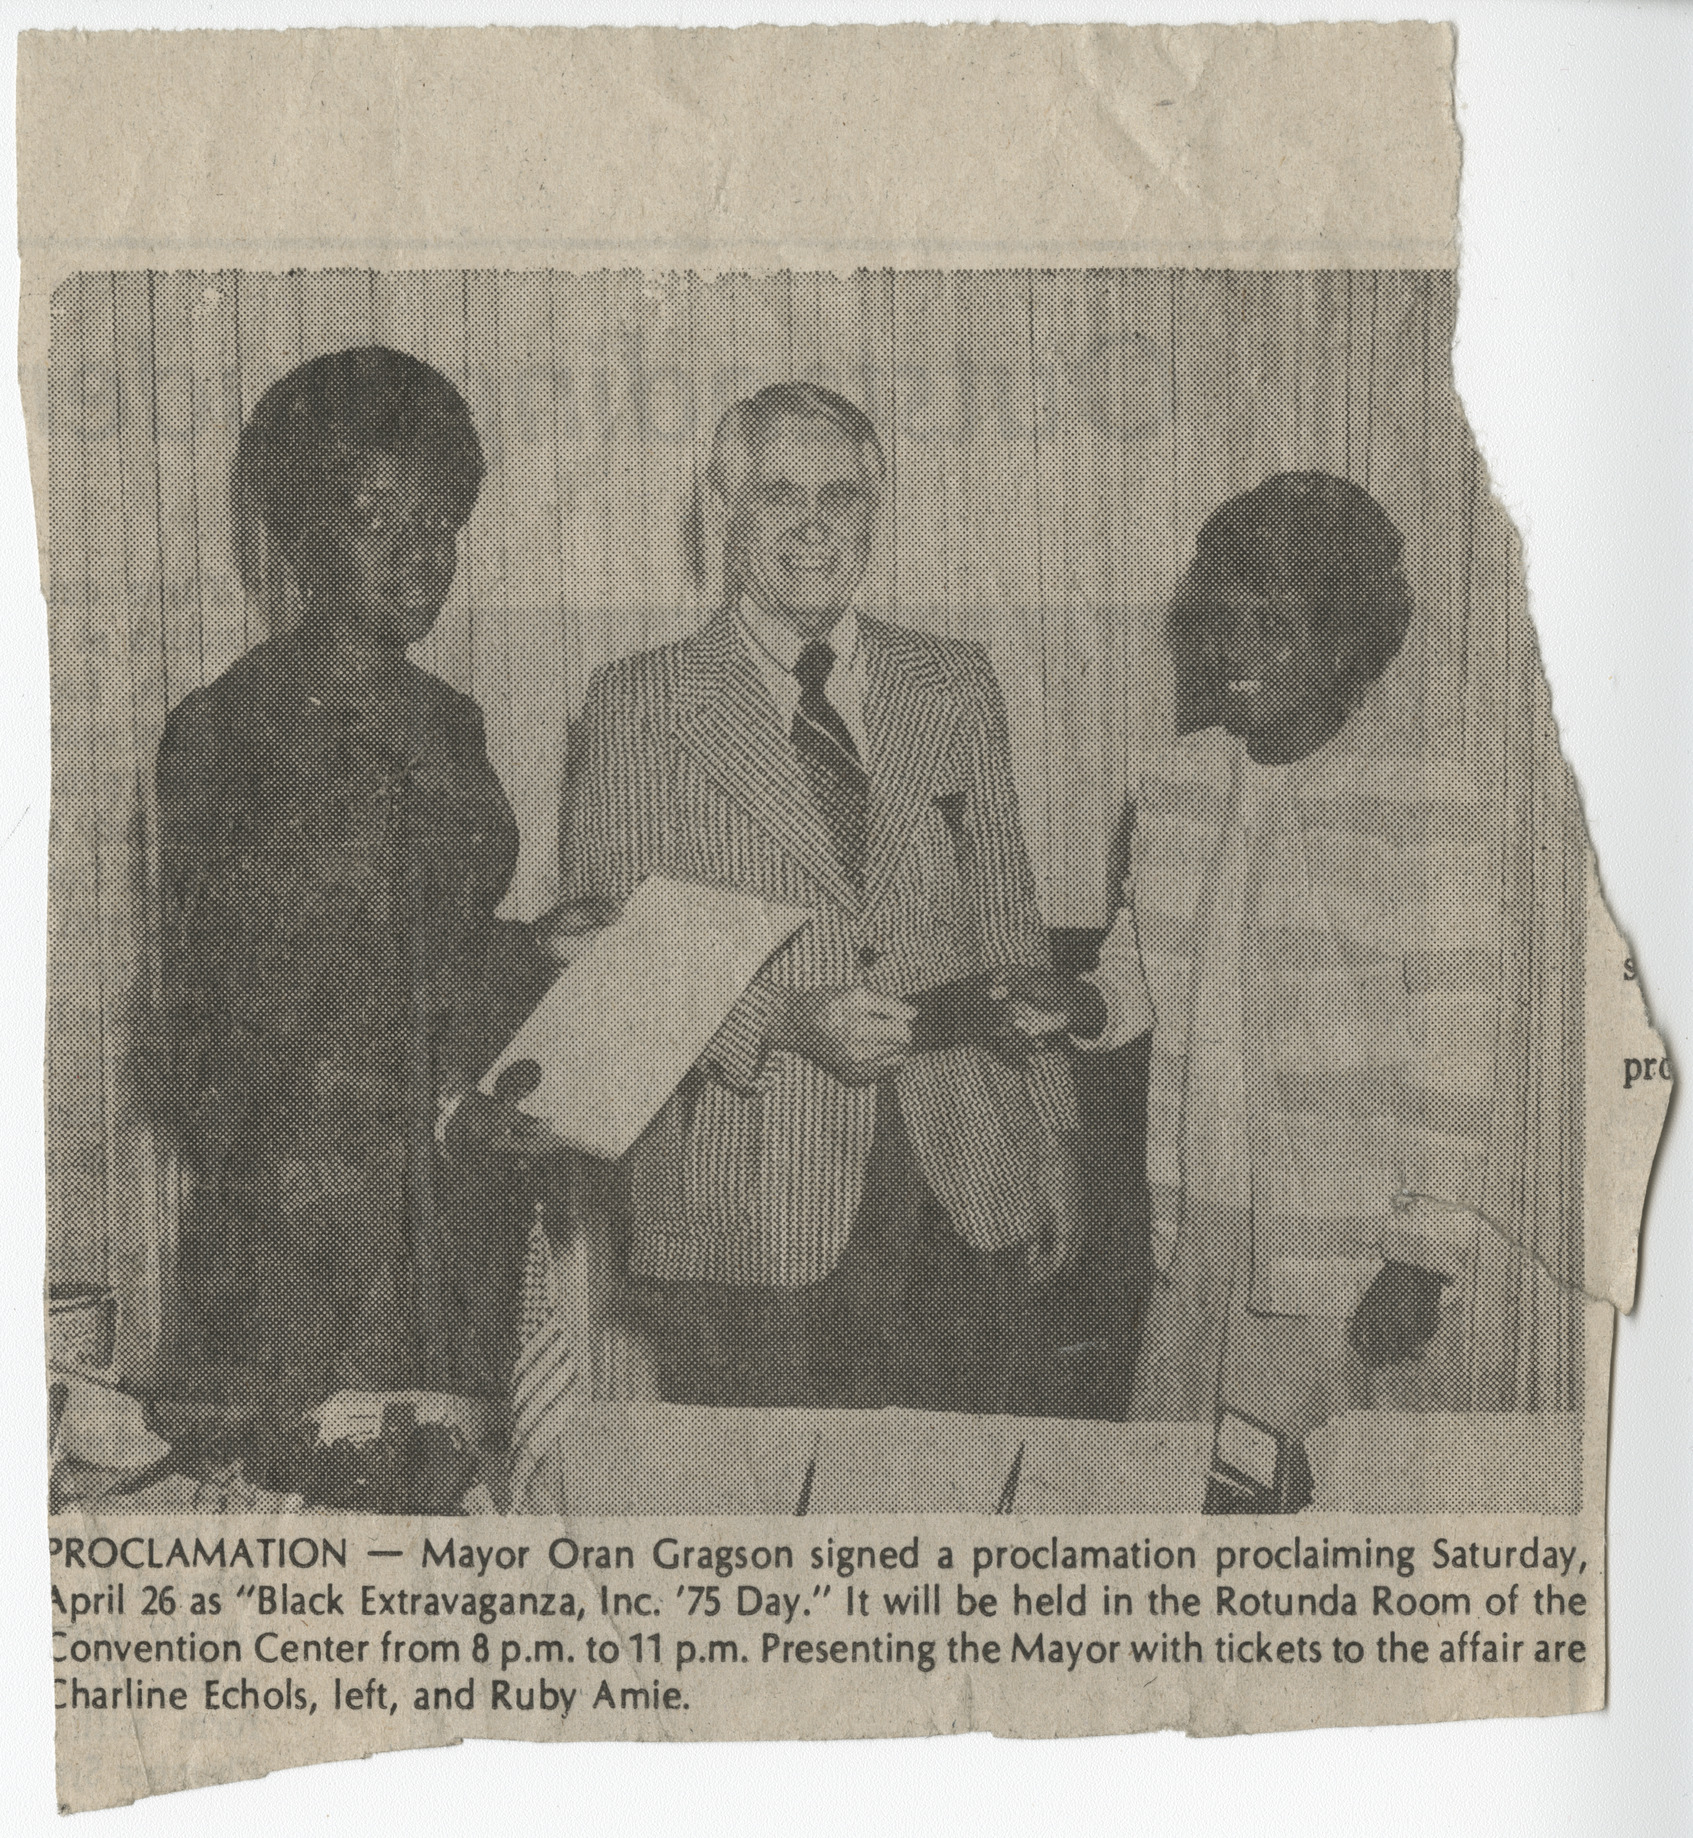 Newspaper clipping, Proclamation showing Mayor Oran Gragson with Charline Echols and Ruby Amie presenting the mayor with tickets to the Black Extravaganza, Inc. '75 Day, publication unknown, 1975